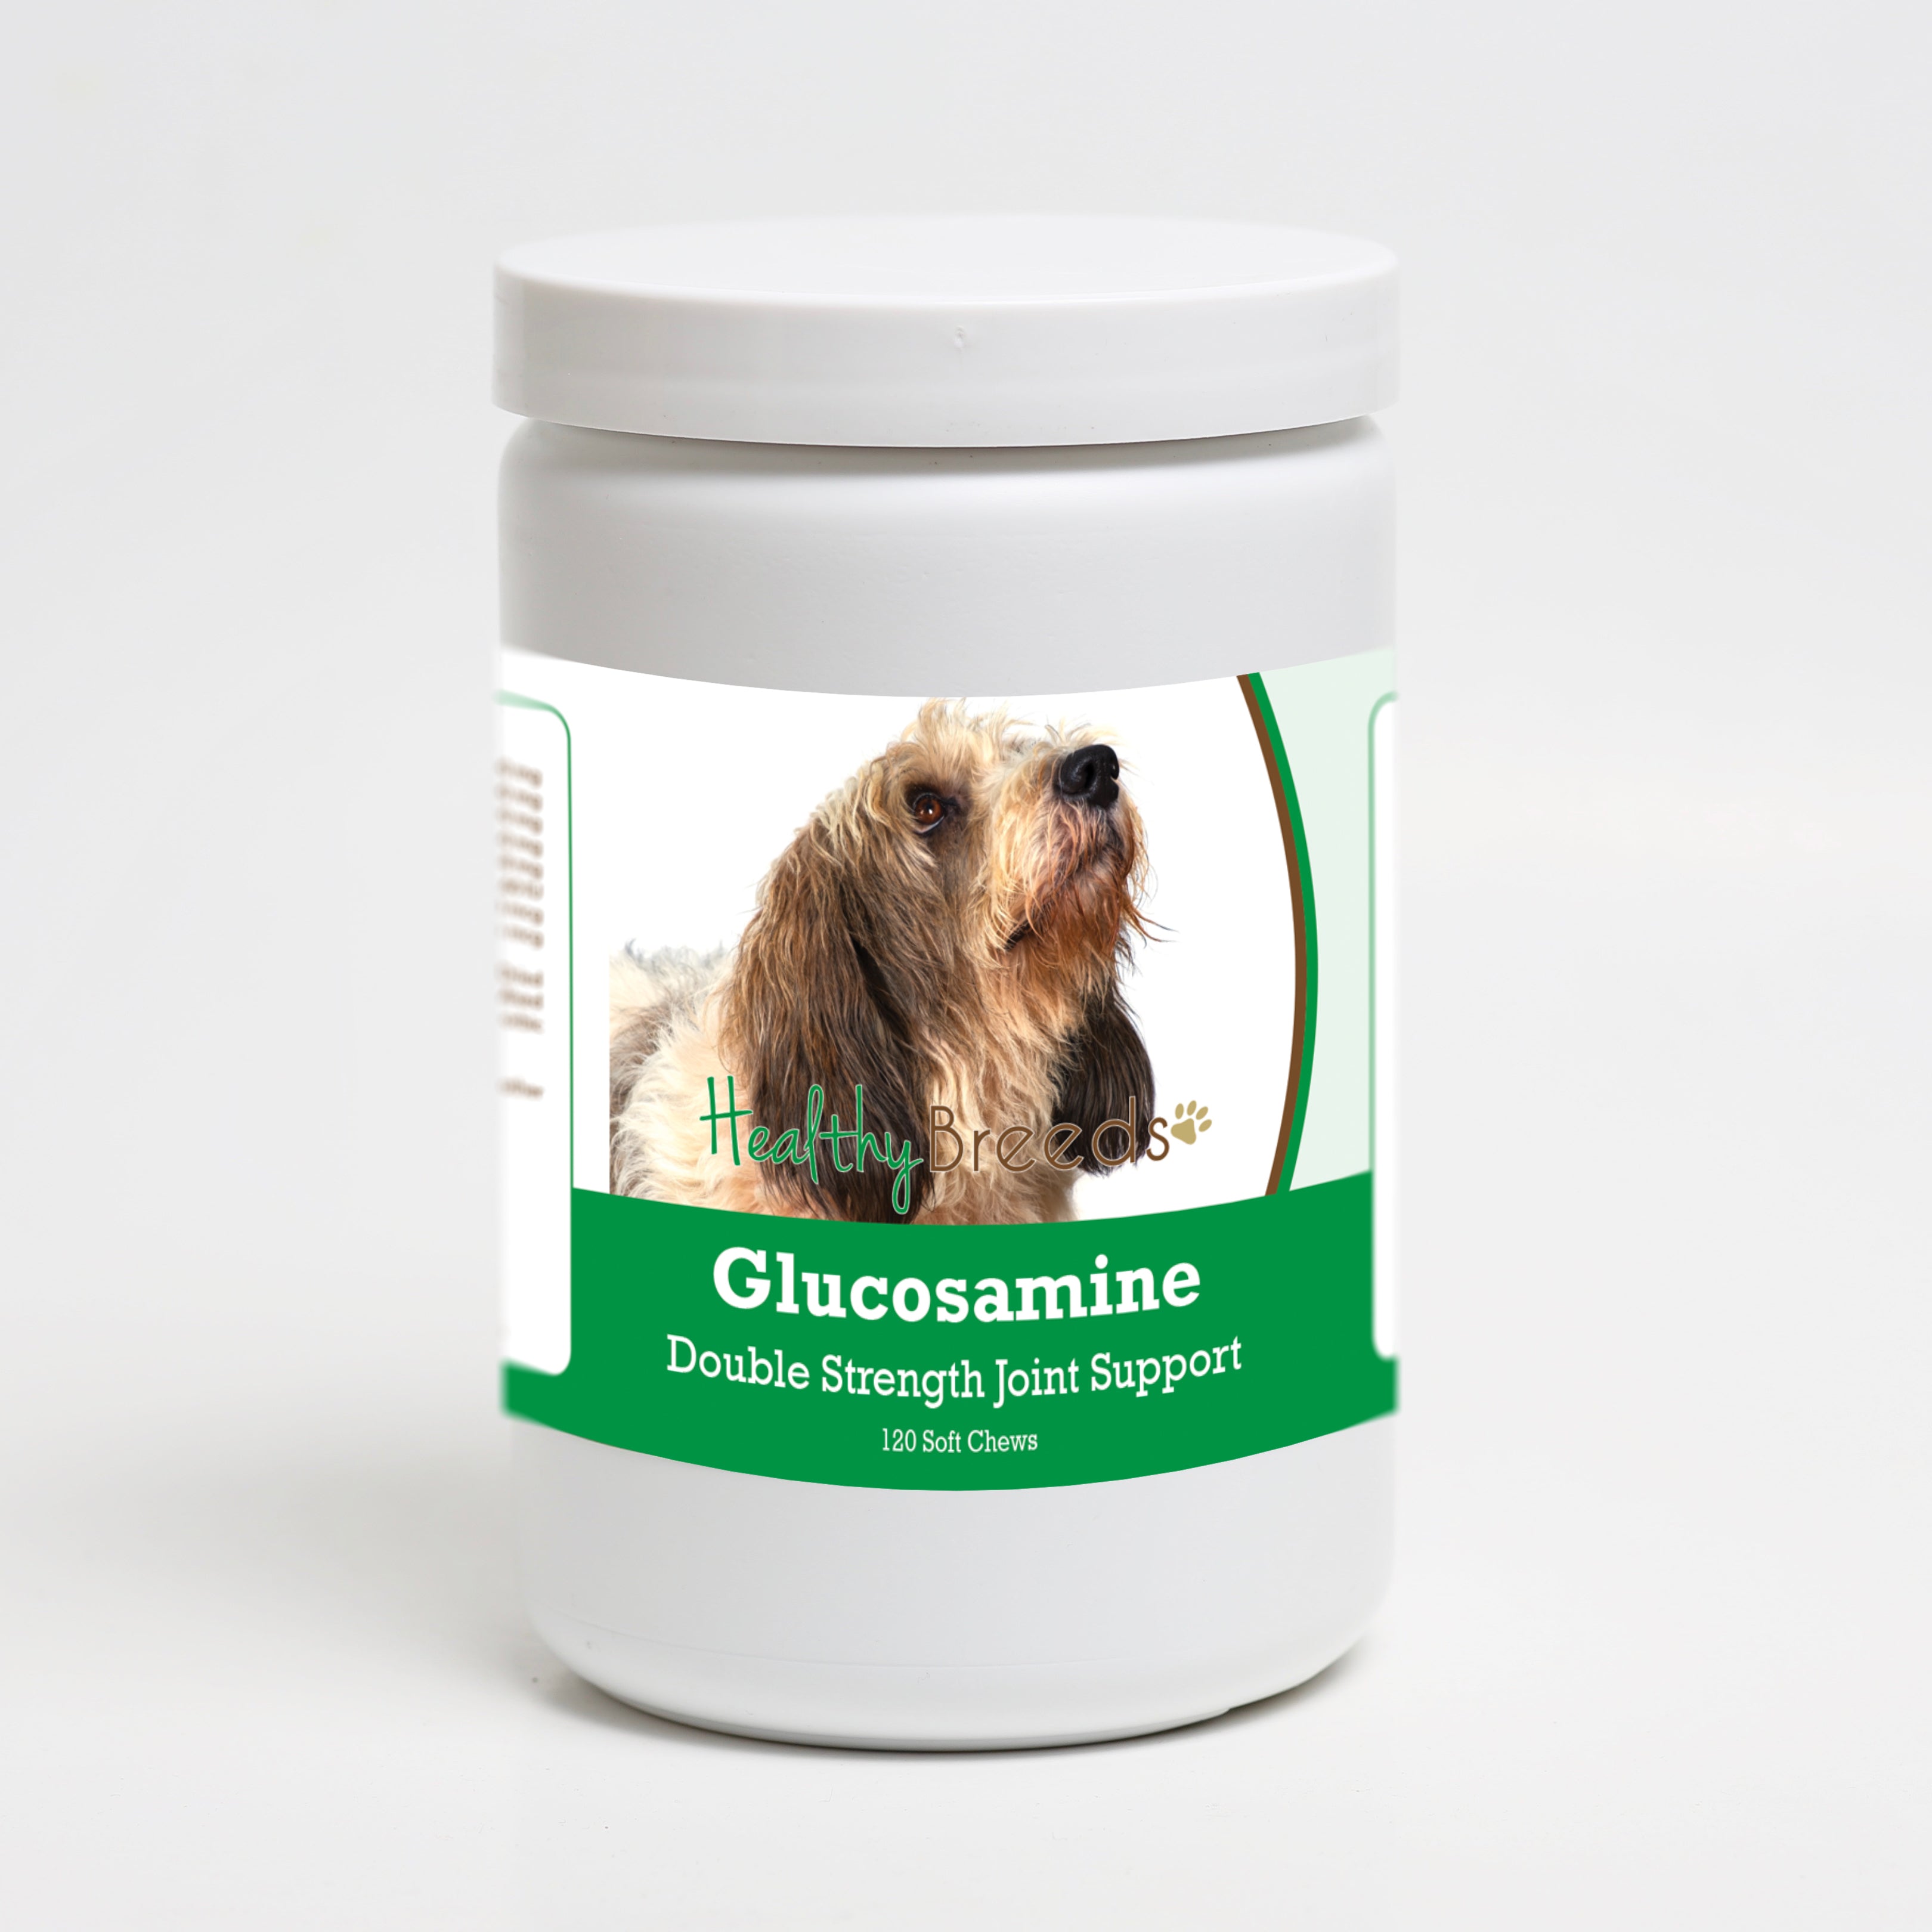 Petits Bassets Griffons Vendeen Glucosamine DS Plus MSM 120 Count